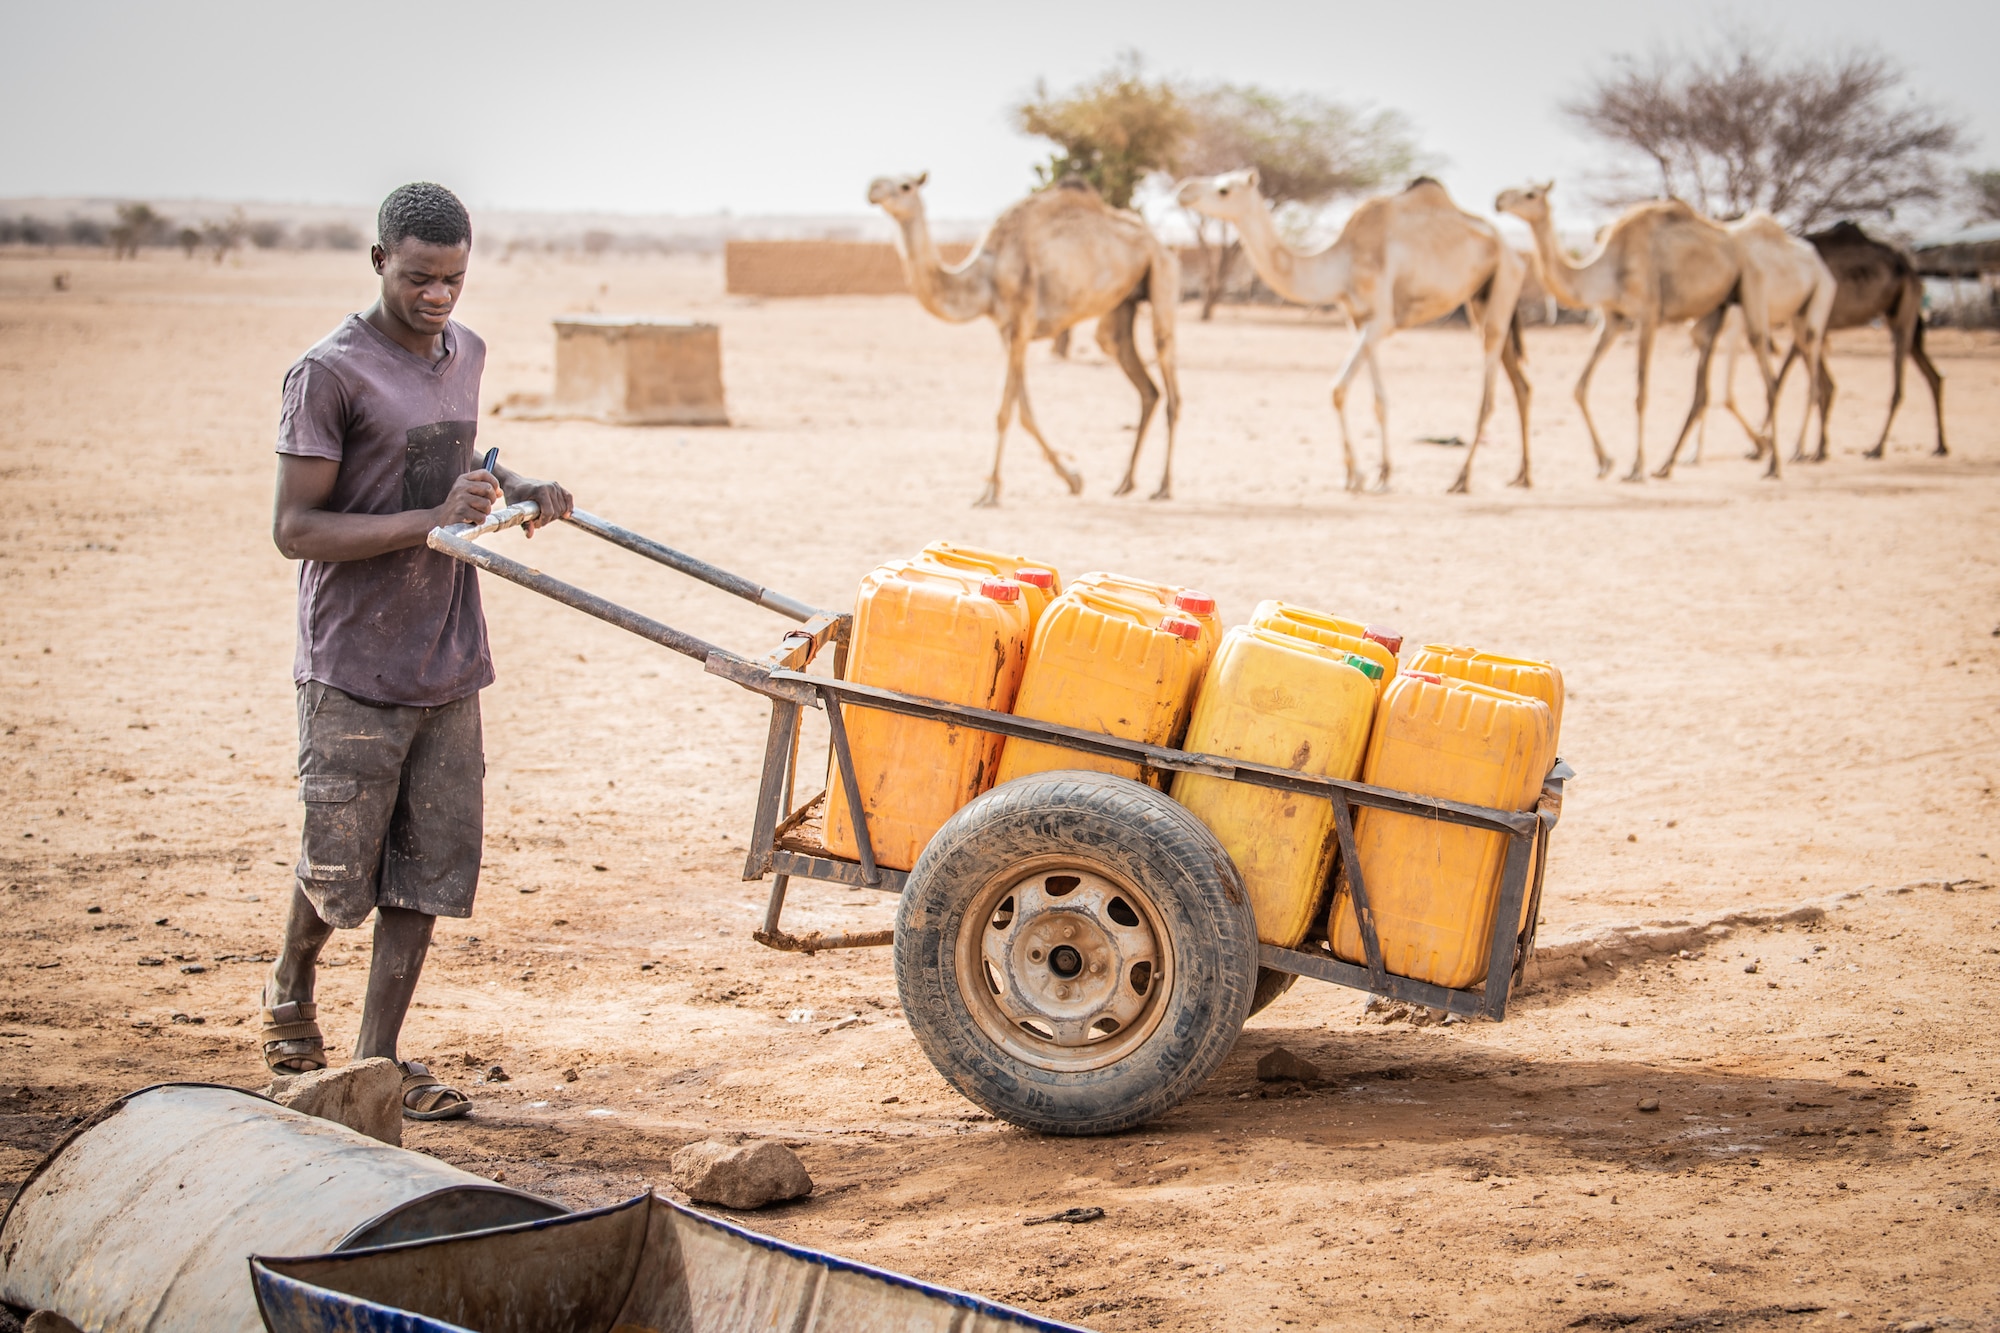 Villager from Alwat, Niger transports water jugs in a cart